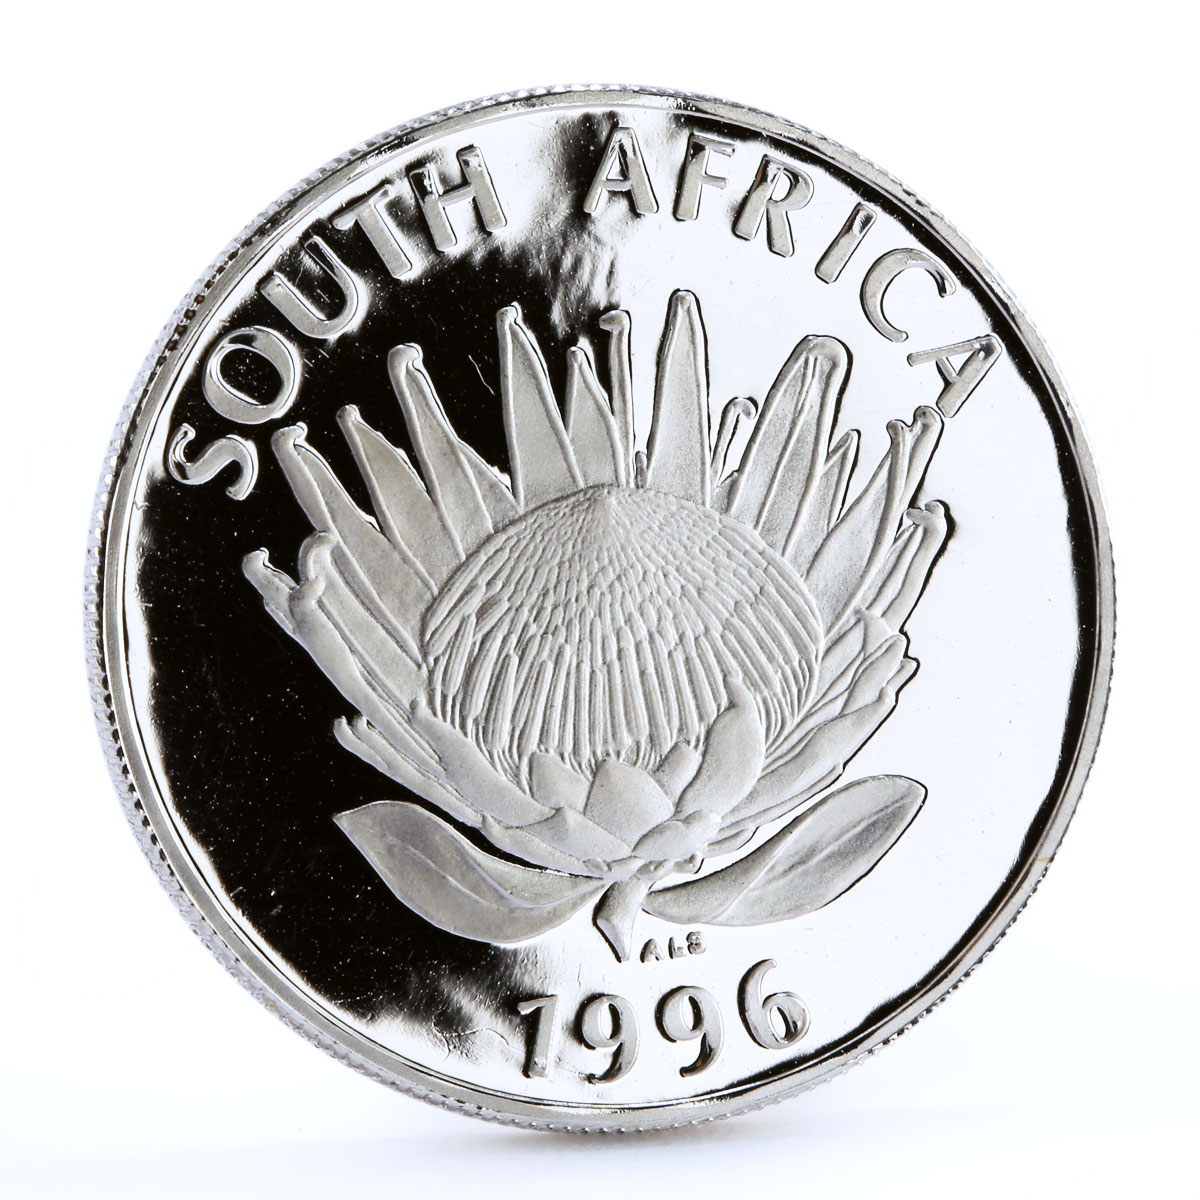 South Africa 1 rand National Constitution Book Independence silver coin 1996